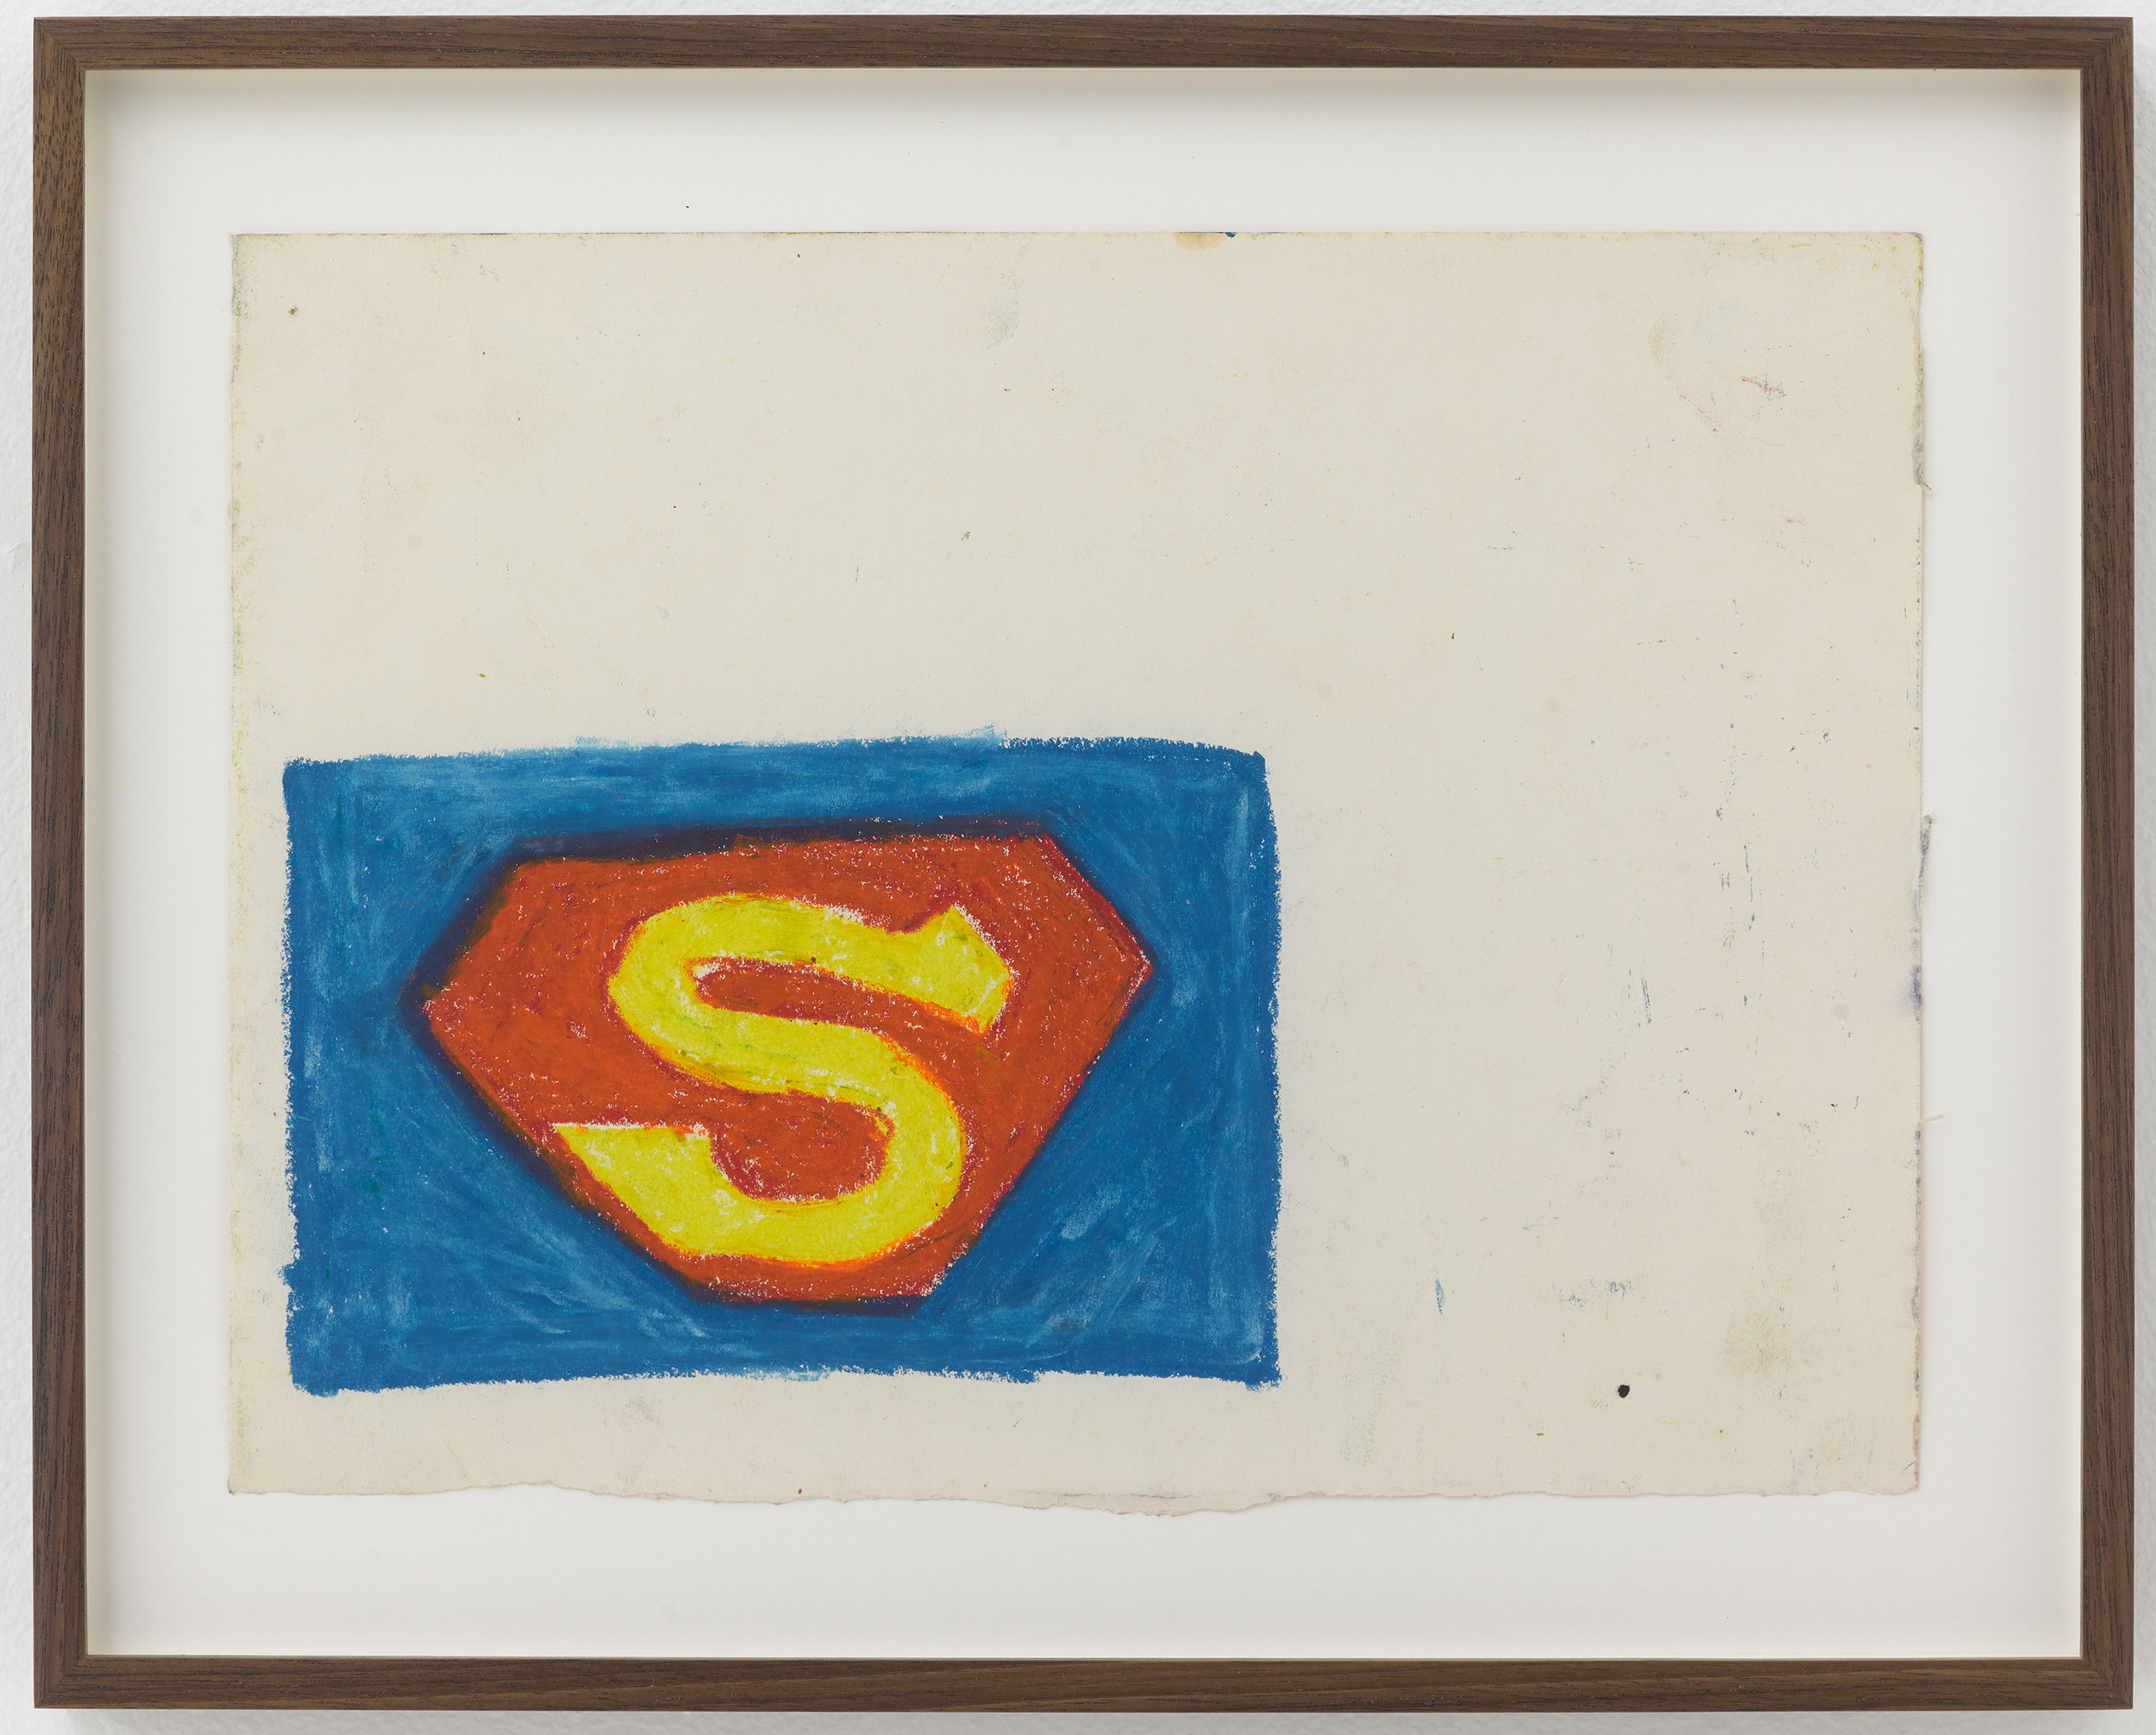  Stewart Hitch,  Superman Logo,  c. 1978, Oil stick on paper, 9 × 12 inches   